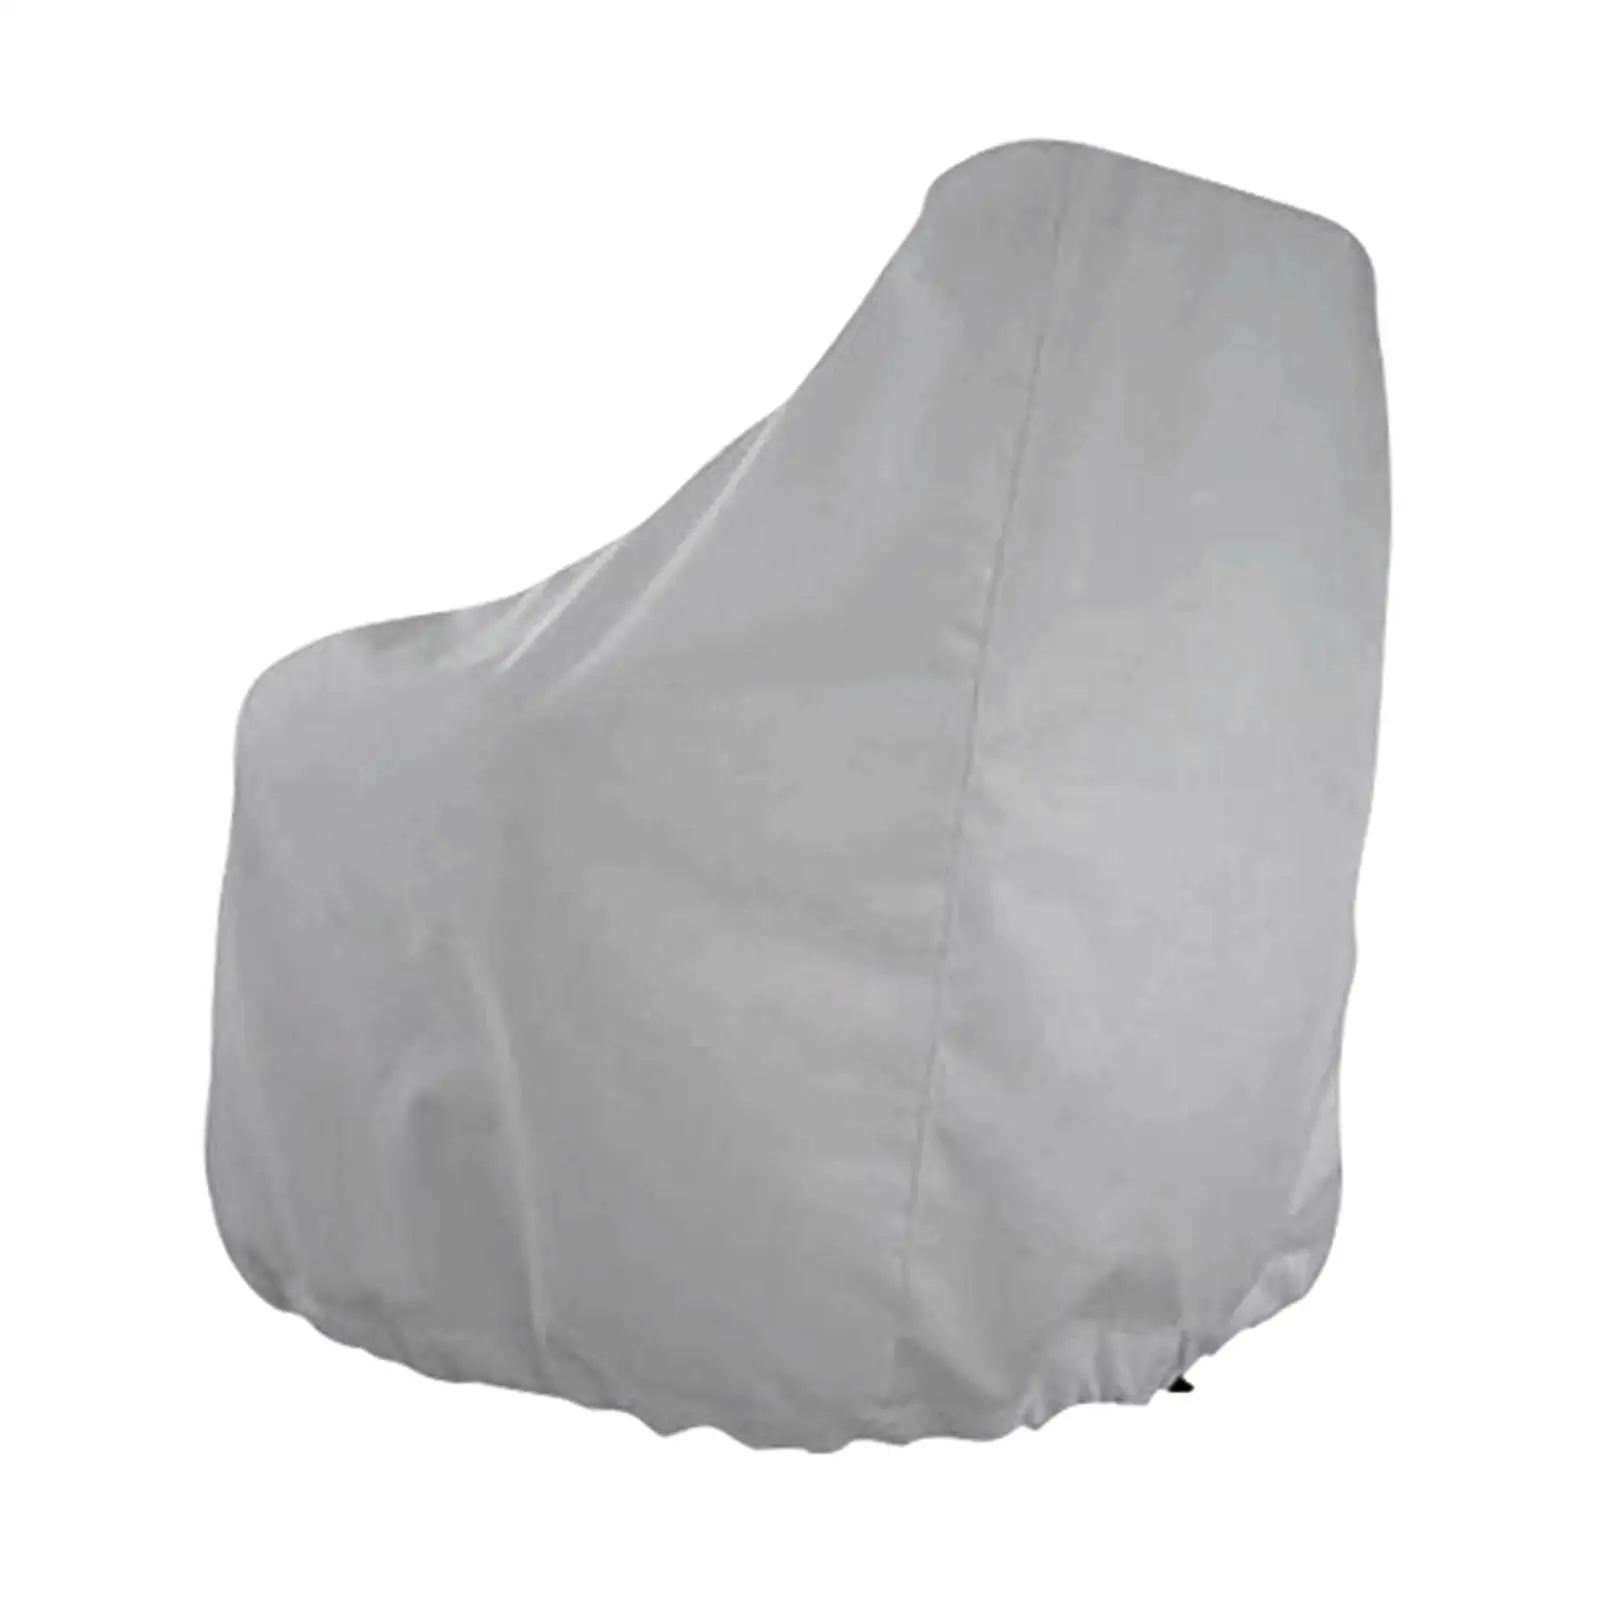 3x Boat Seat Cover, Folding Waterproof Heavy-Duty Weather Resistant Fabric Protects Fishing s 